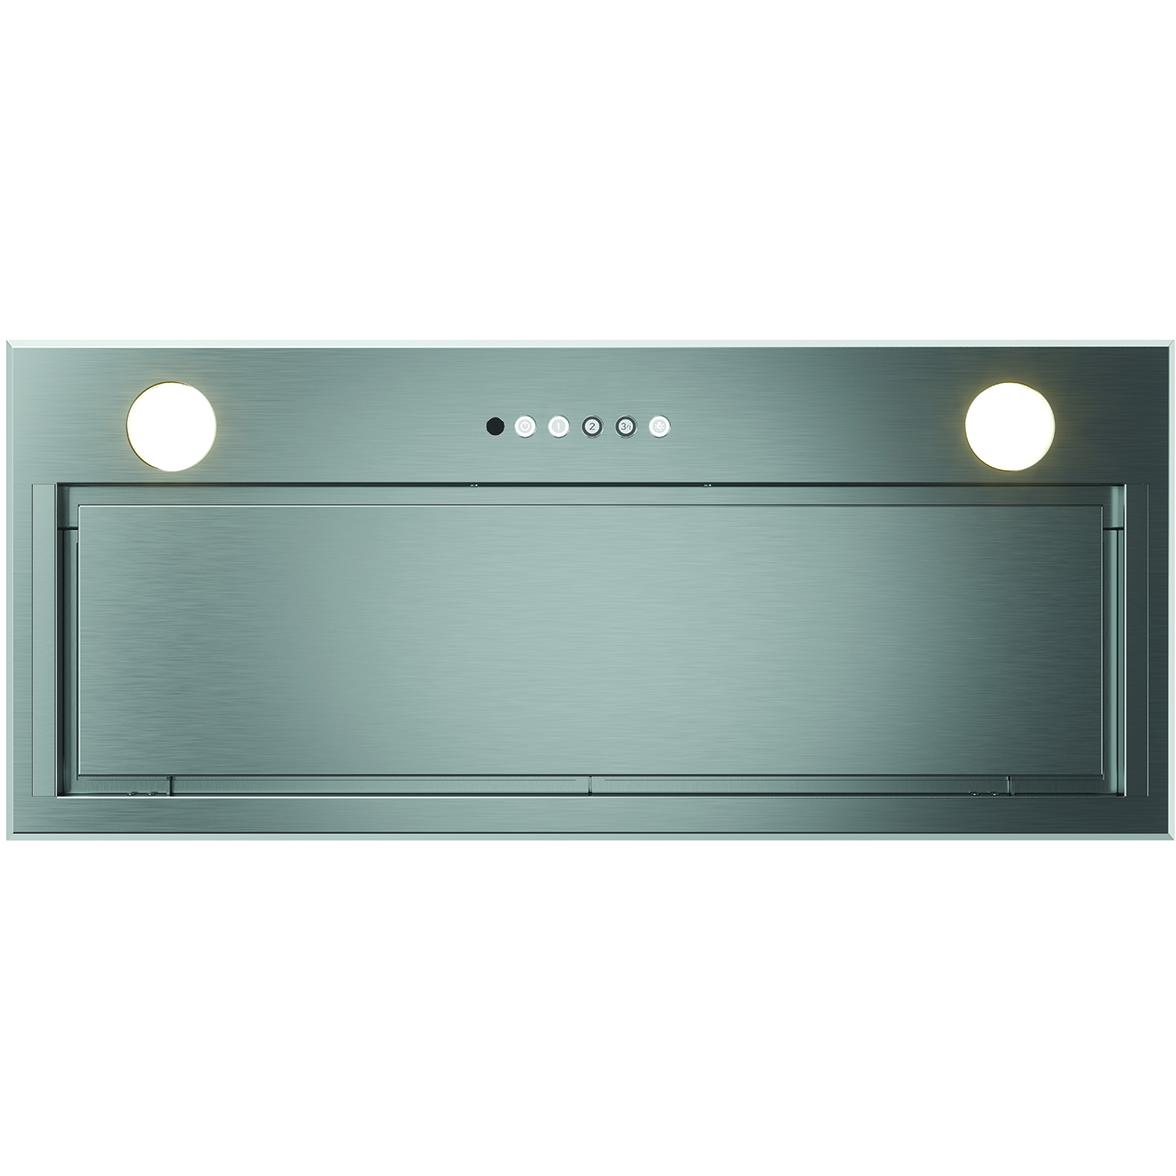 Faber 35-inch Inca Lux hood insert with Variable Air Management INLX35SSV IMAGE 1